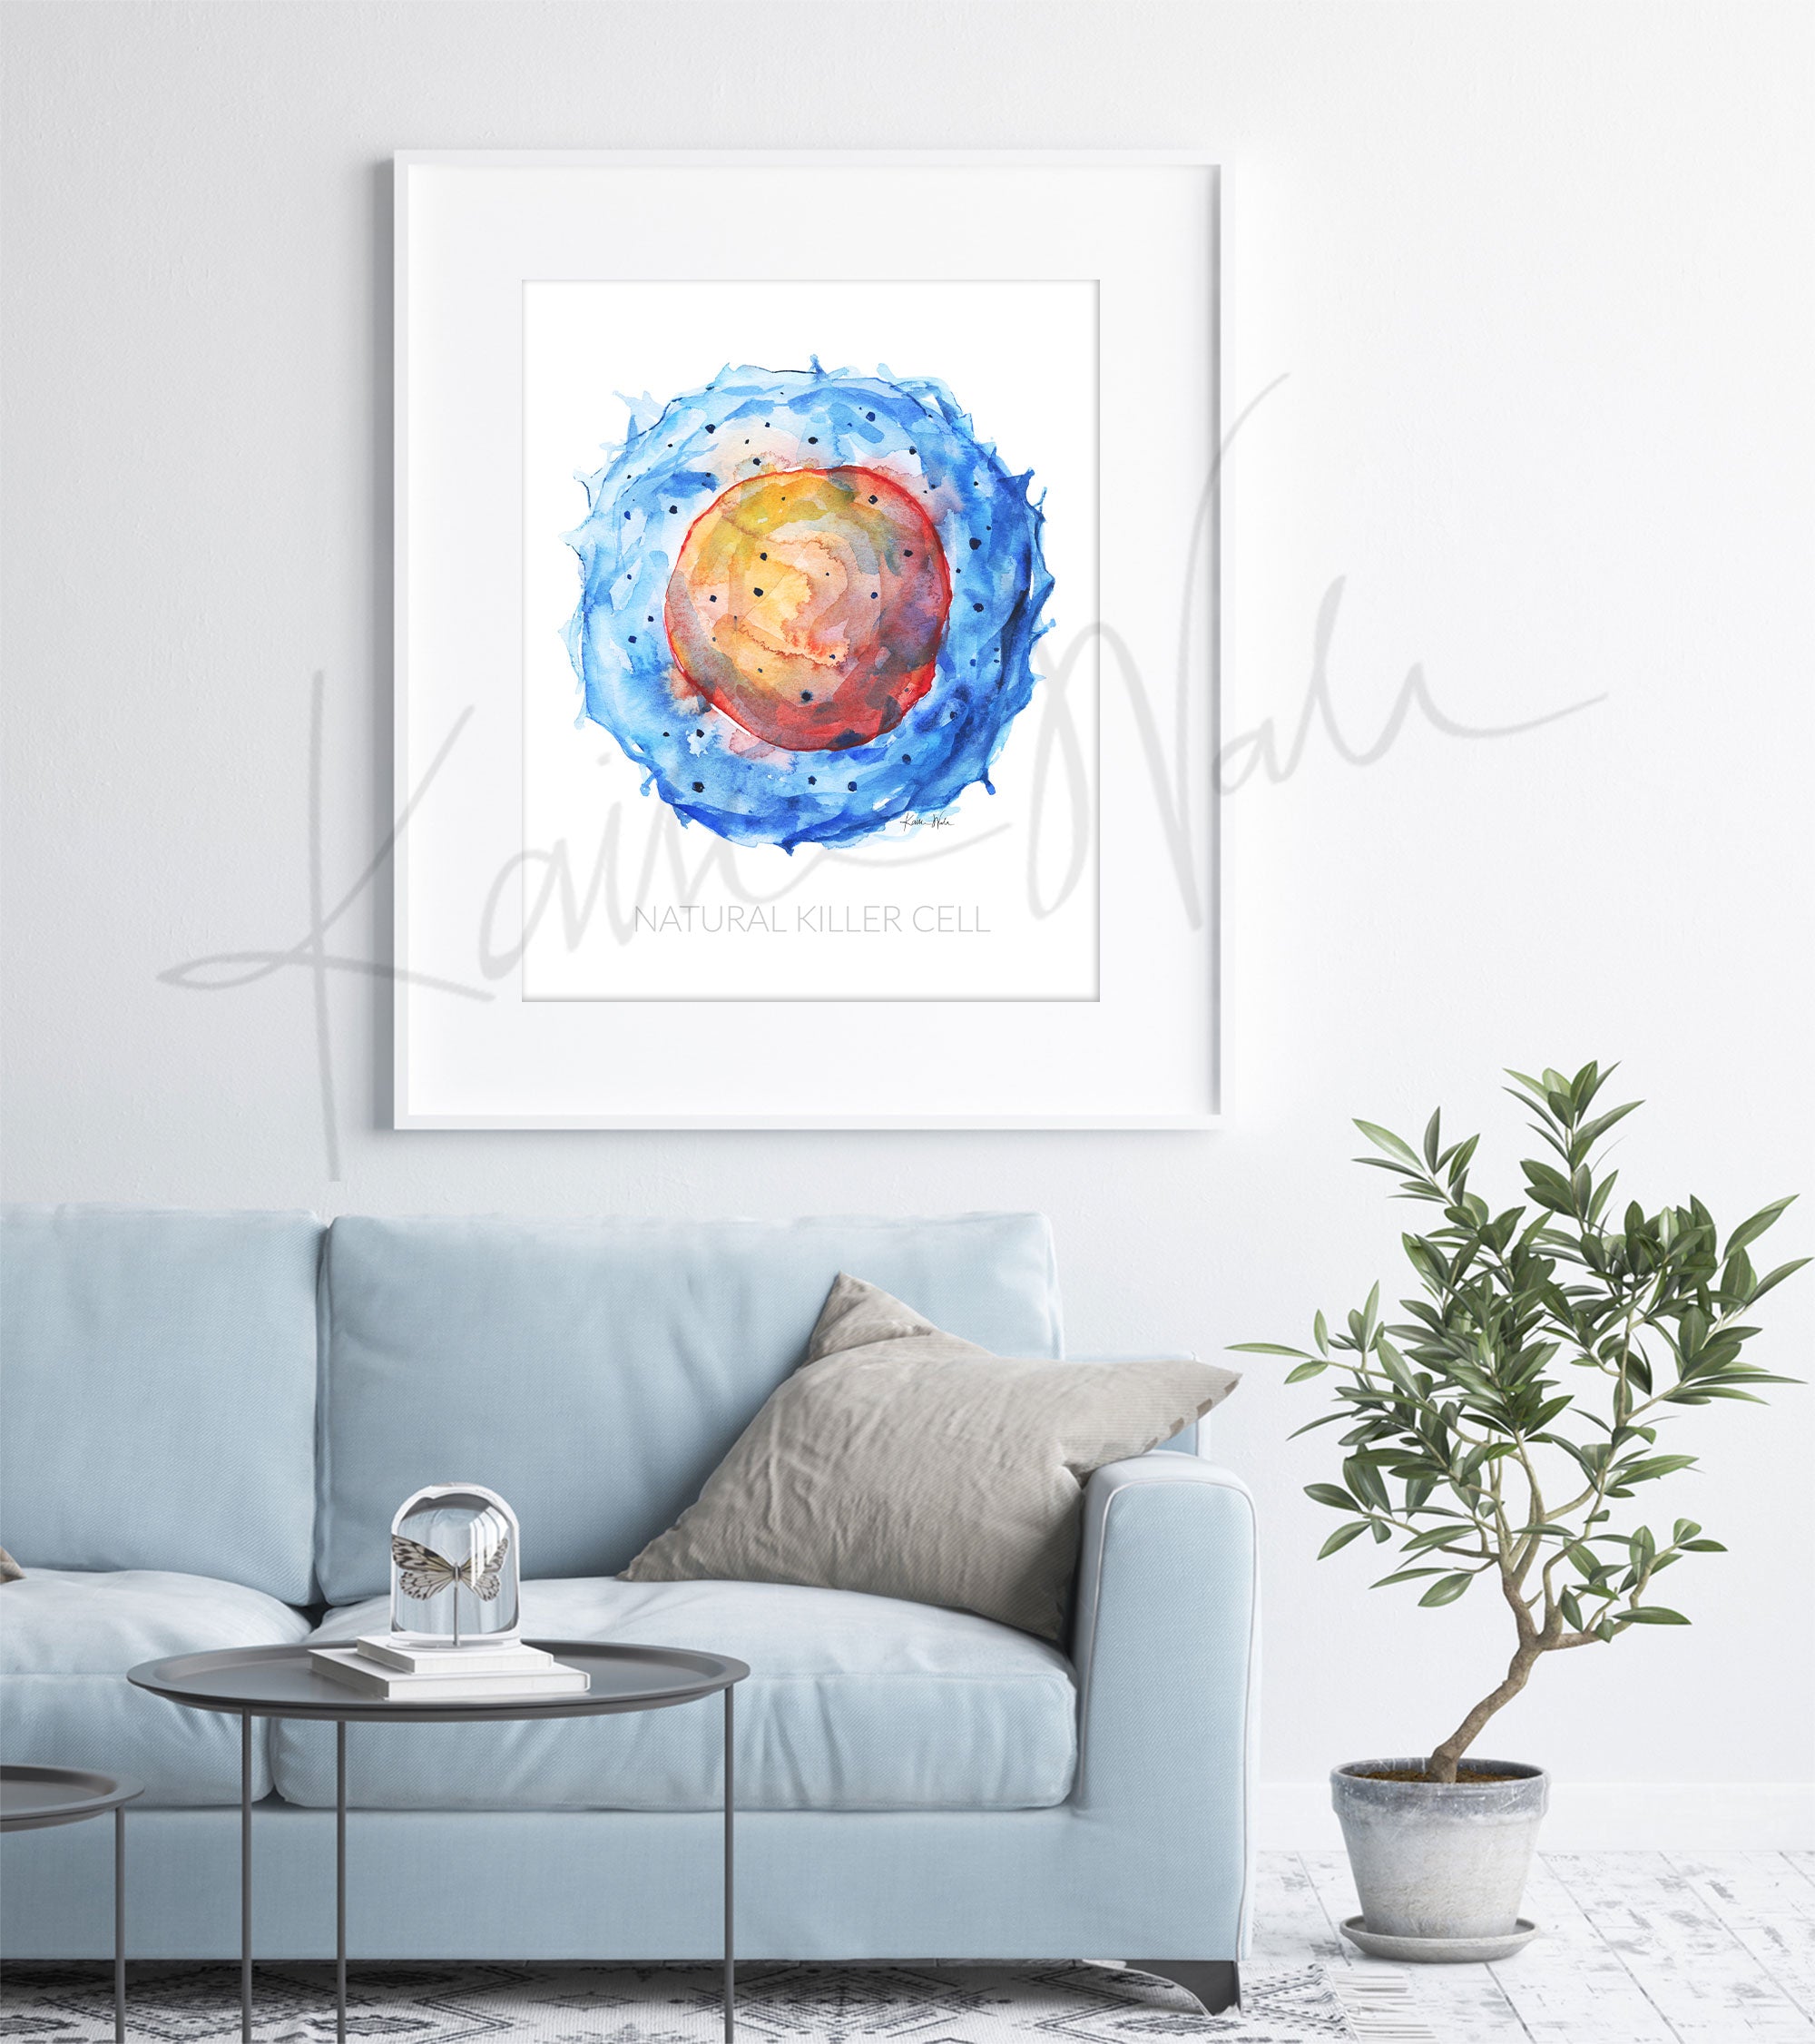 Framed watercolor painting of a natural killer cell. The painting is hanging over a blue couch.